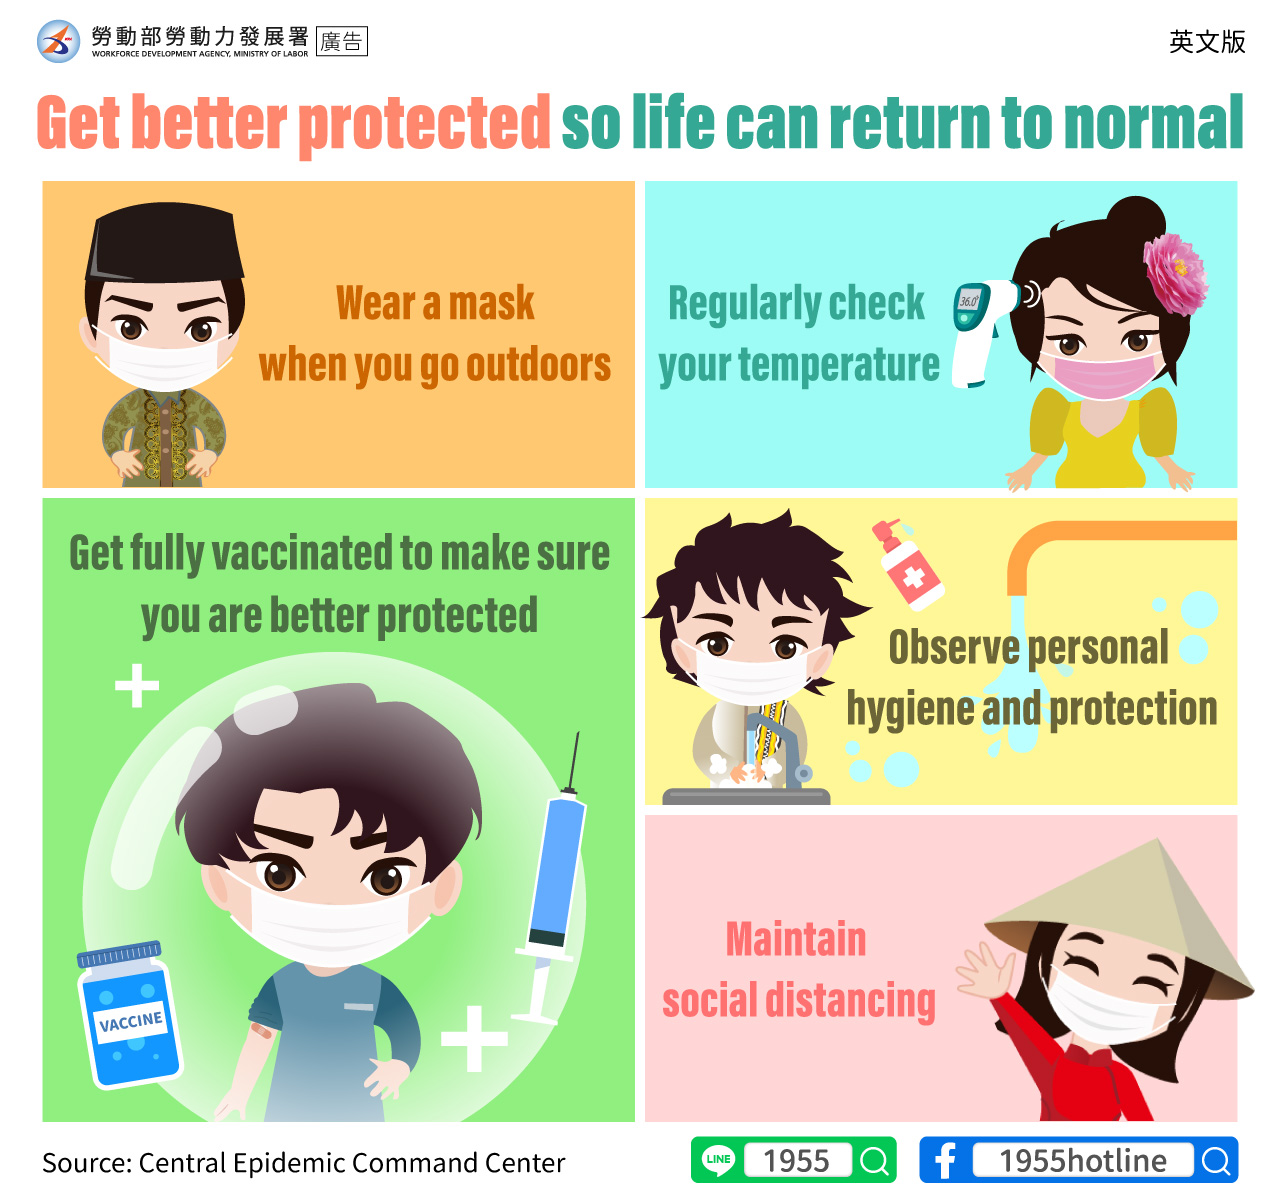 Get better protected so life can return to normal